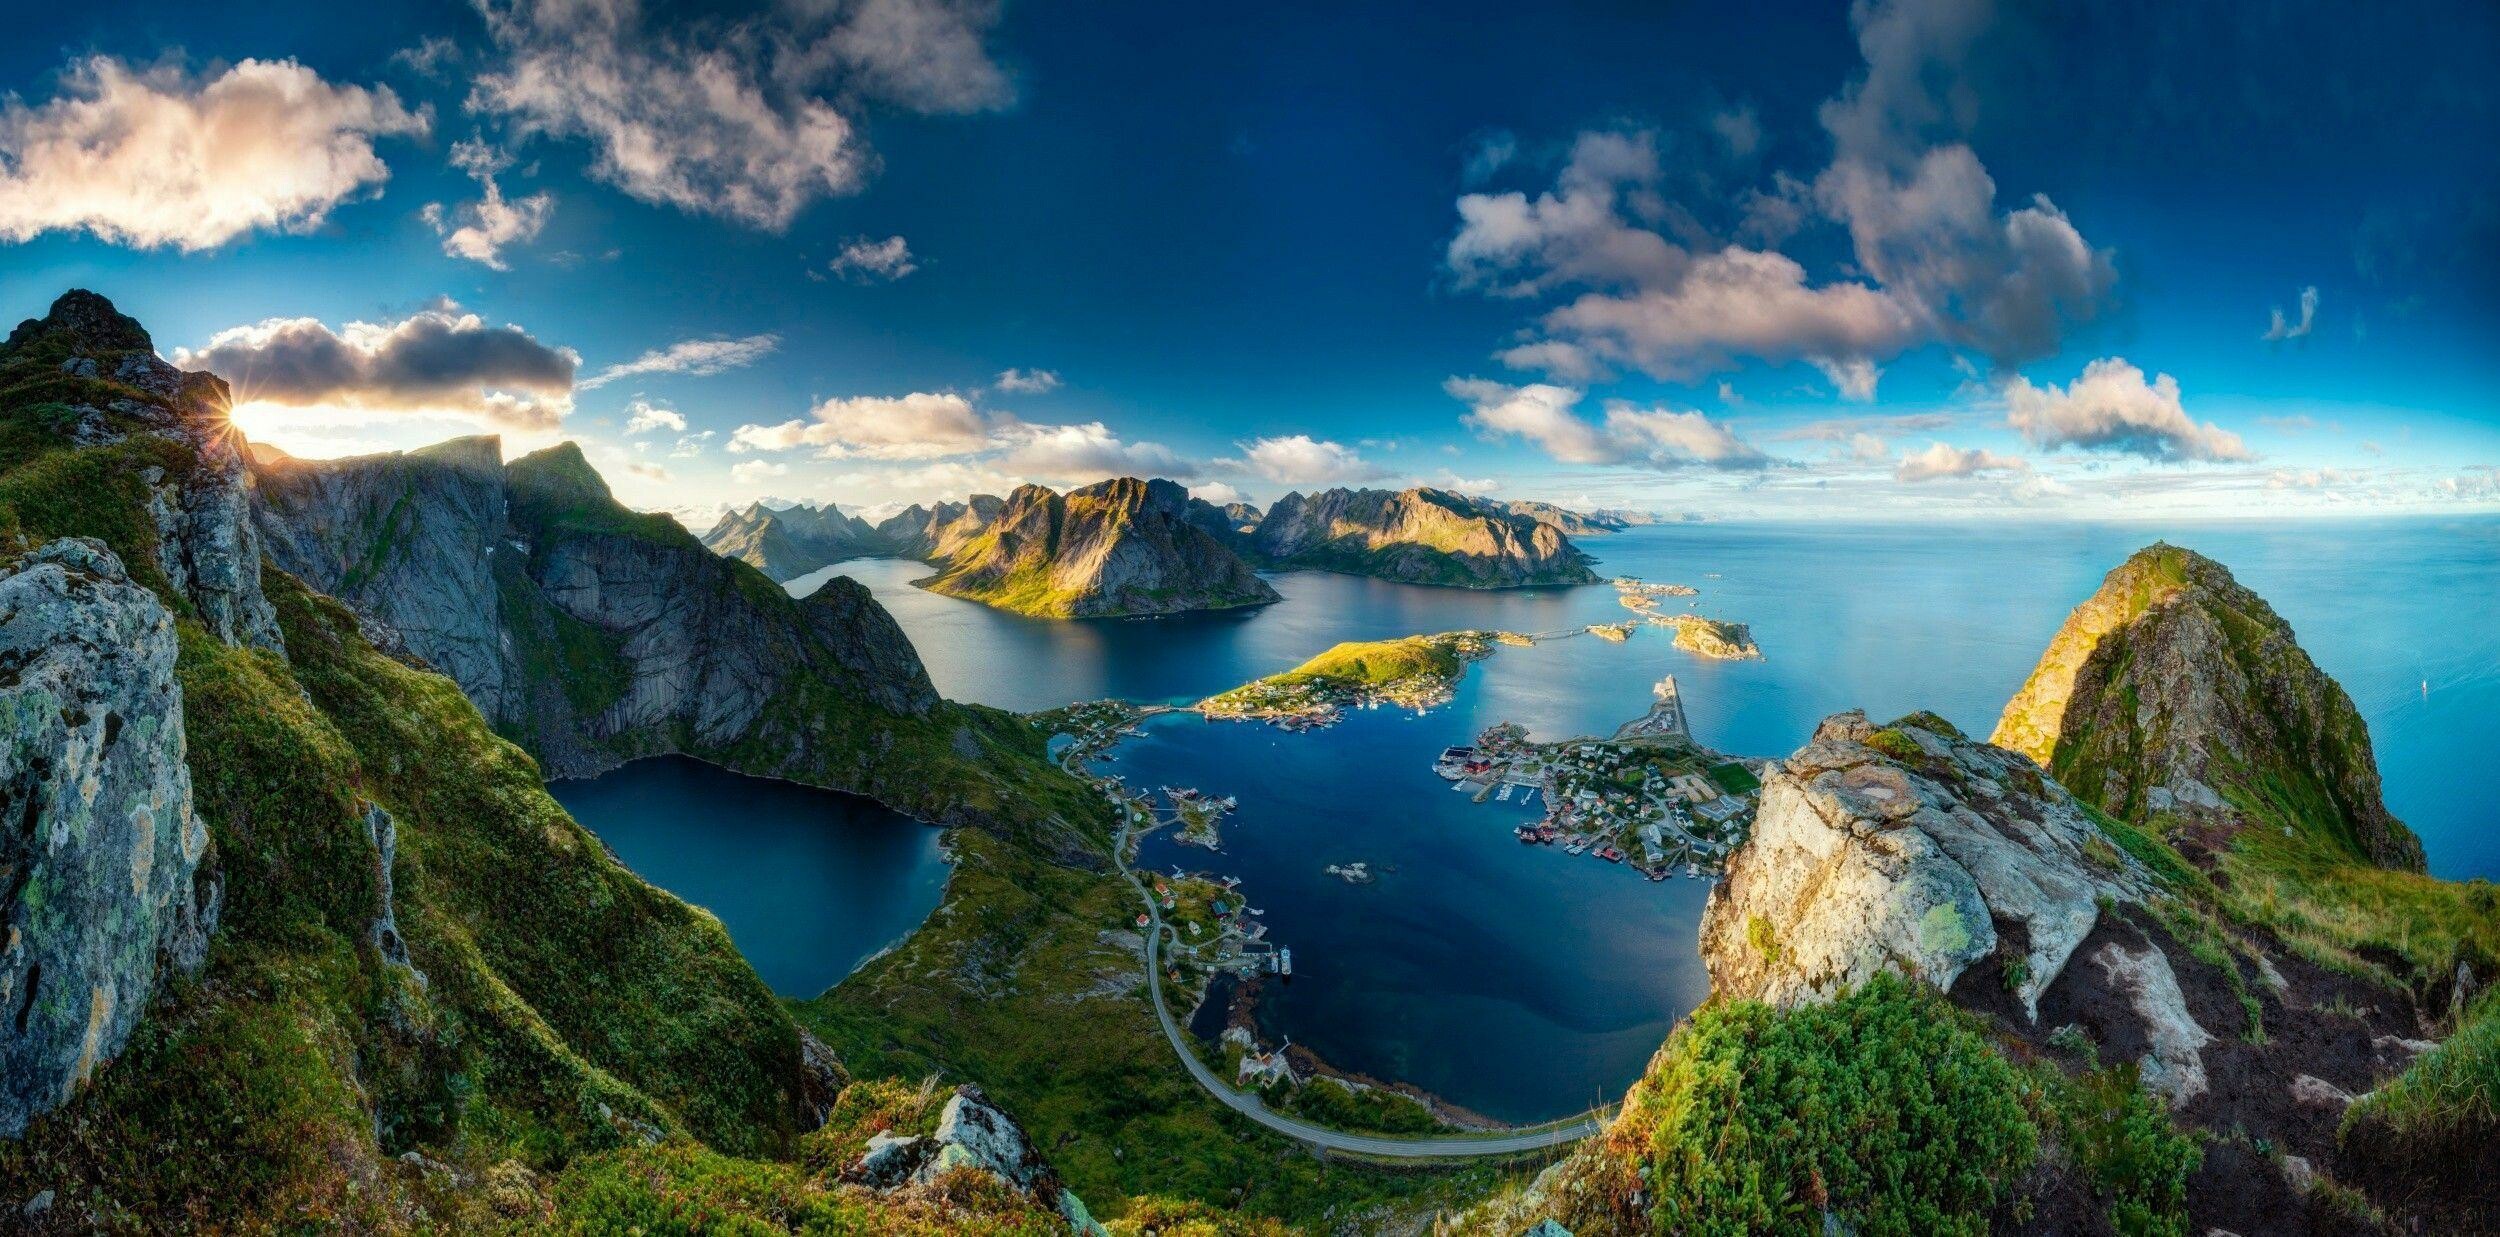 Norway: The most peaceful country, according to the Global Peace Index. 2500x1240 Dual Screen Wallpaper.